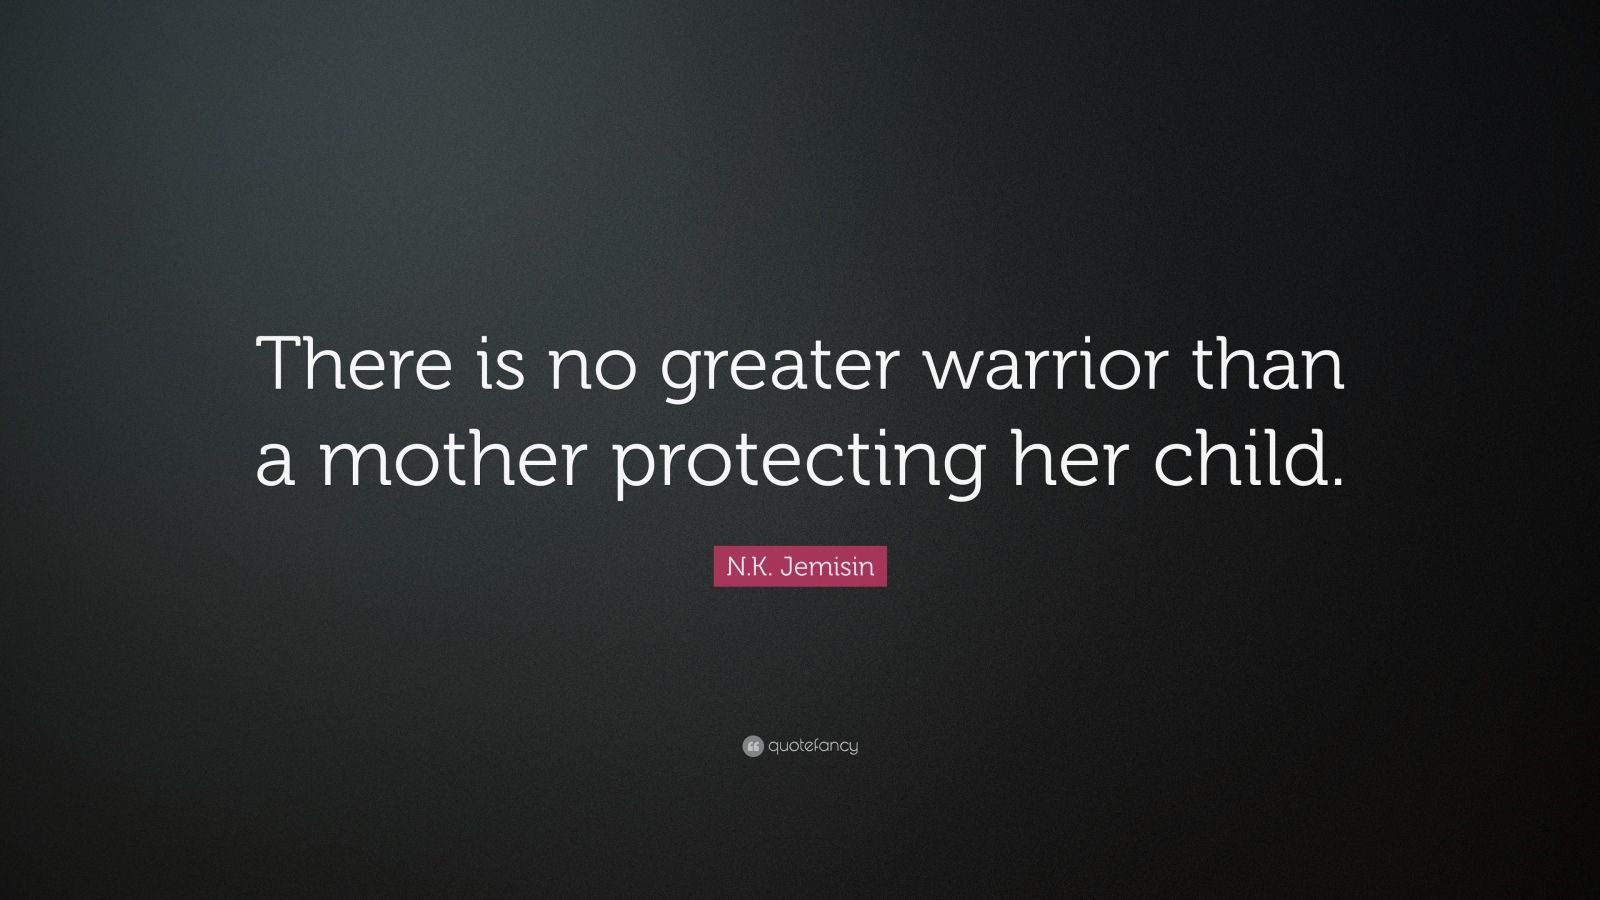 Mother Protecting Child Quotes
 N K Jemisin Quote “There is no greater warrior than a